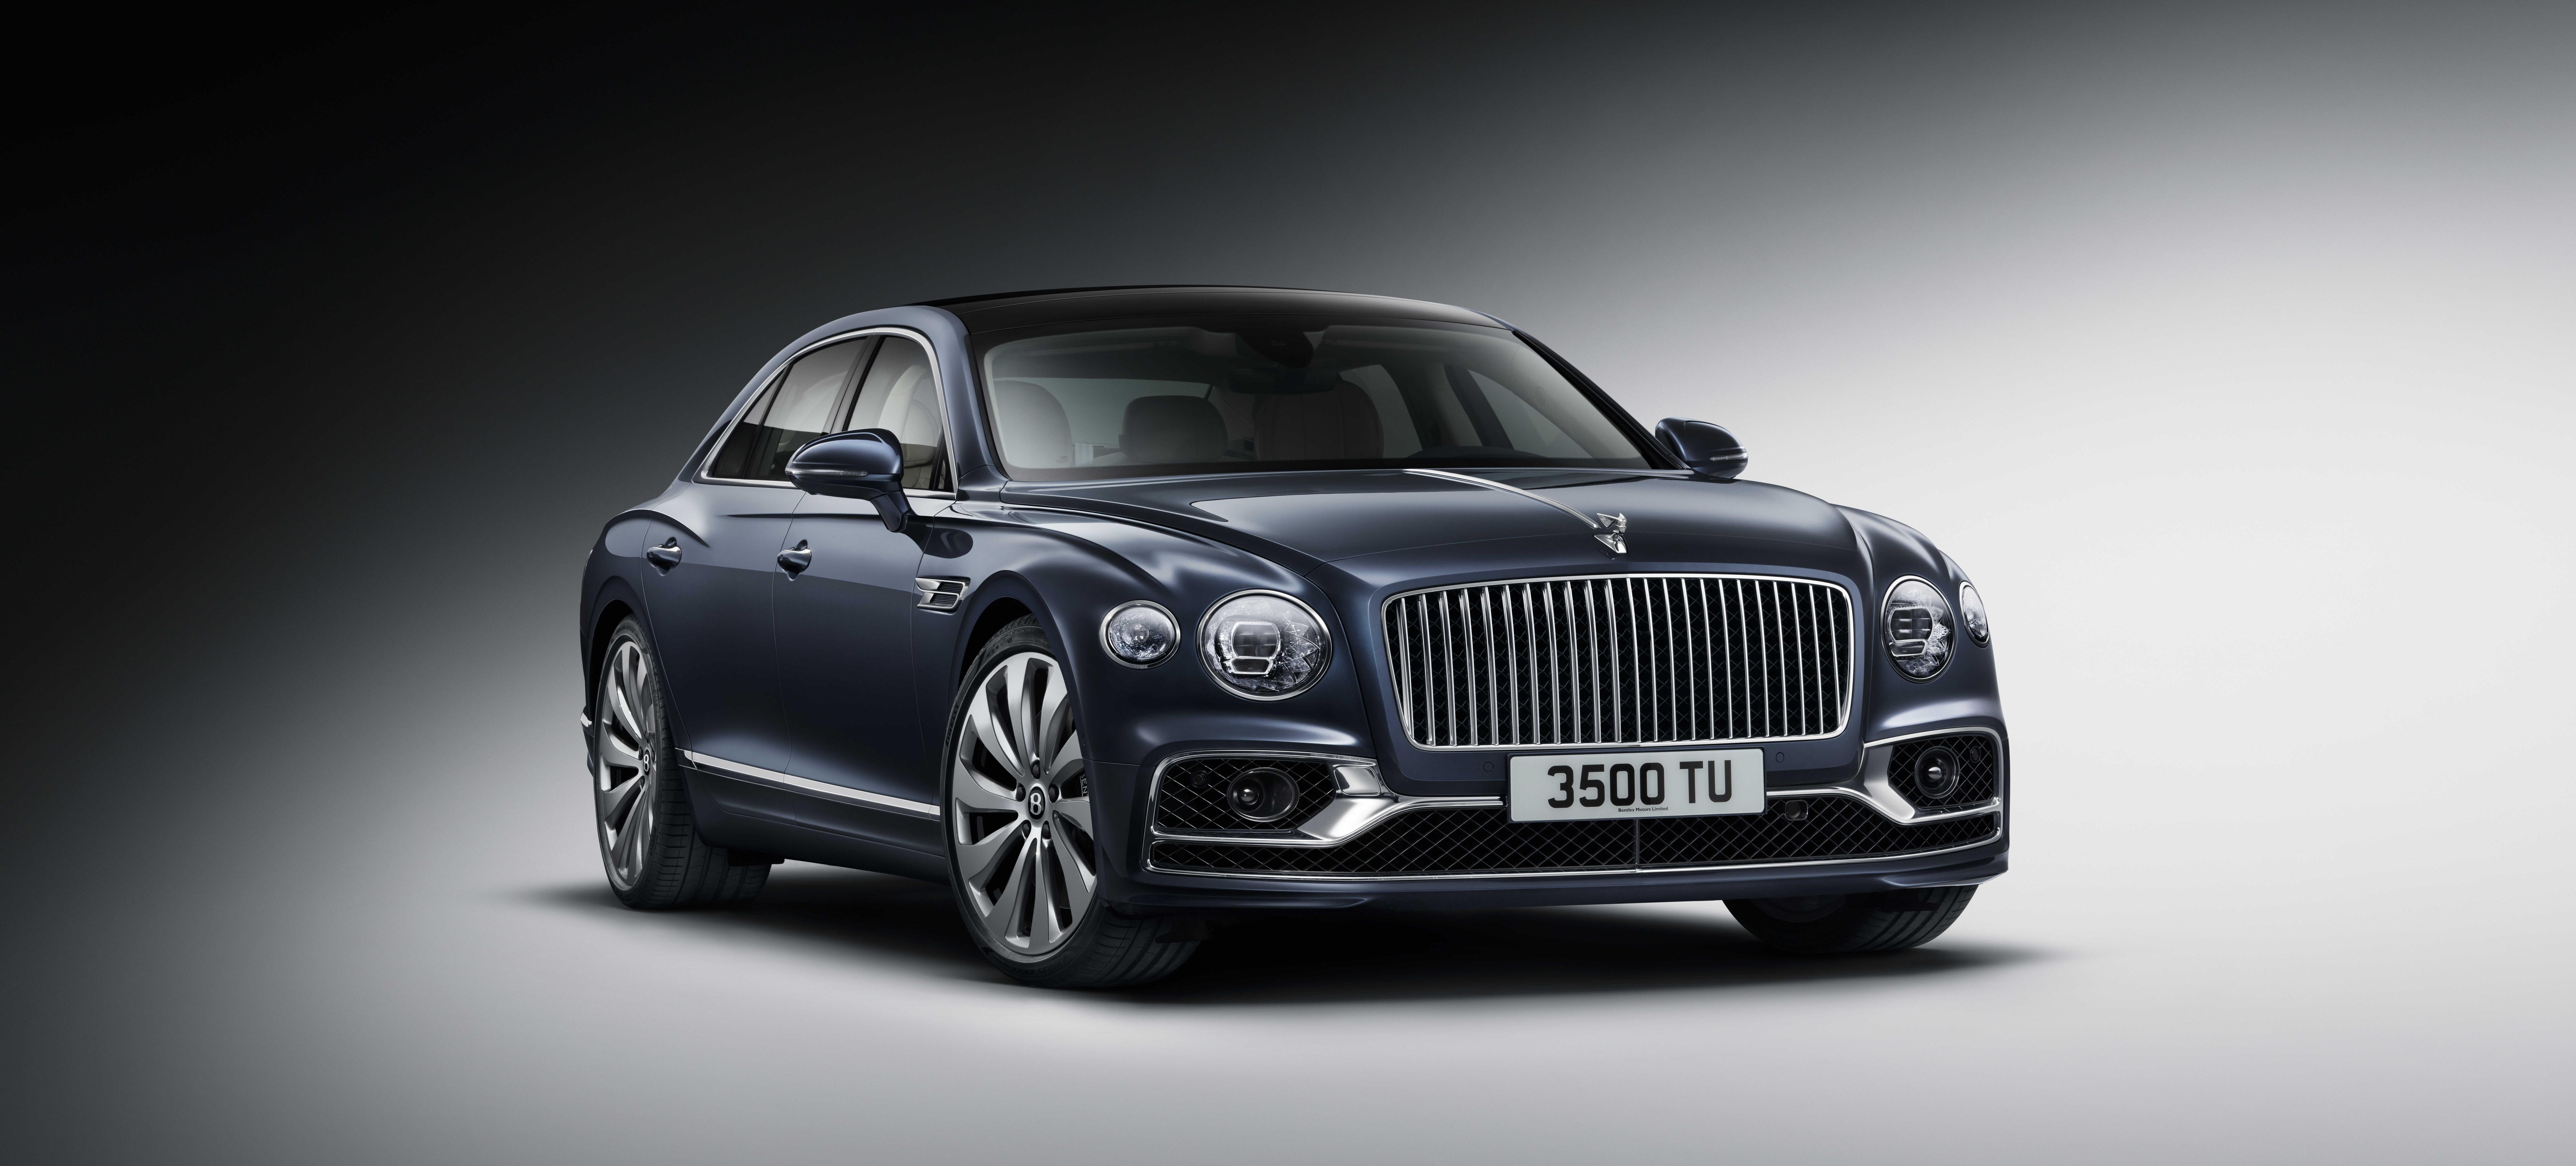 2020 Bentley Flying Spur Front View